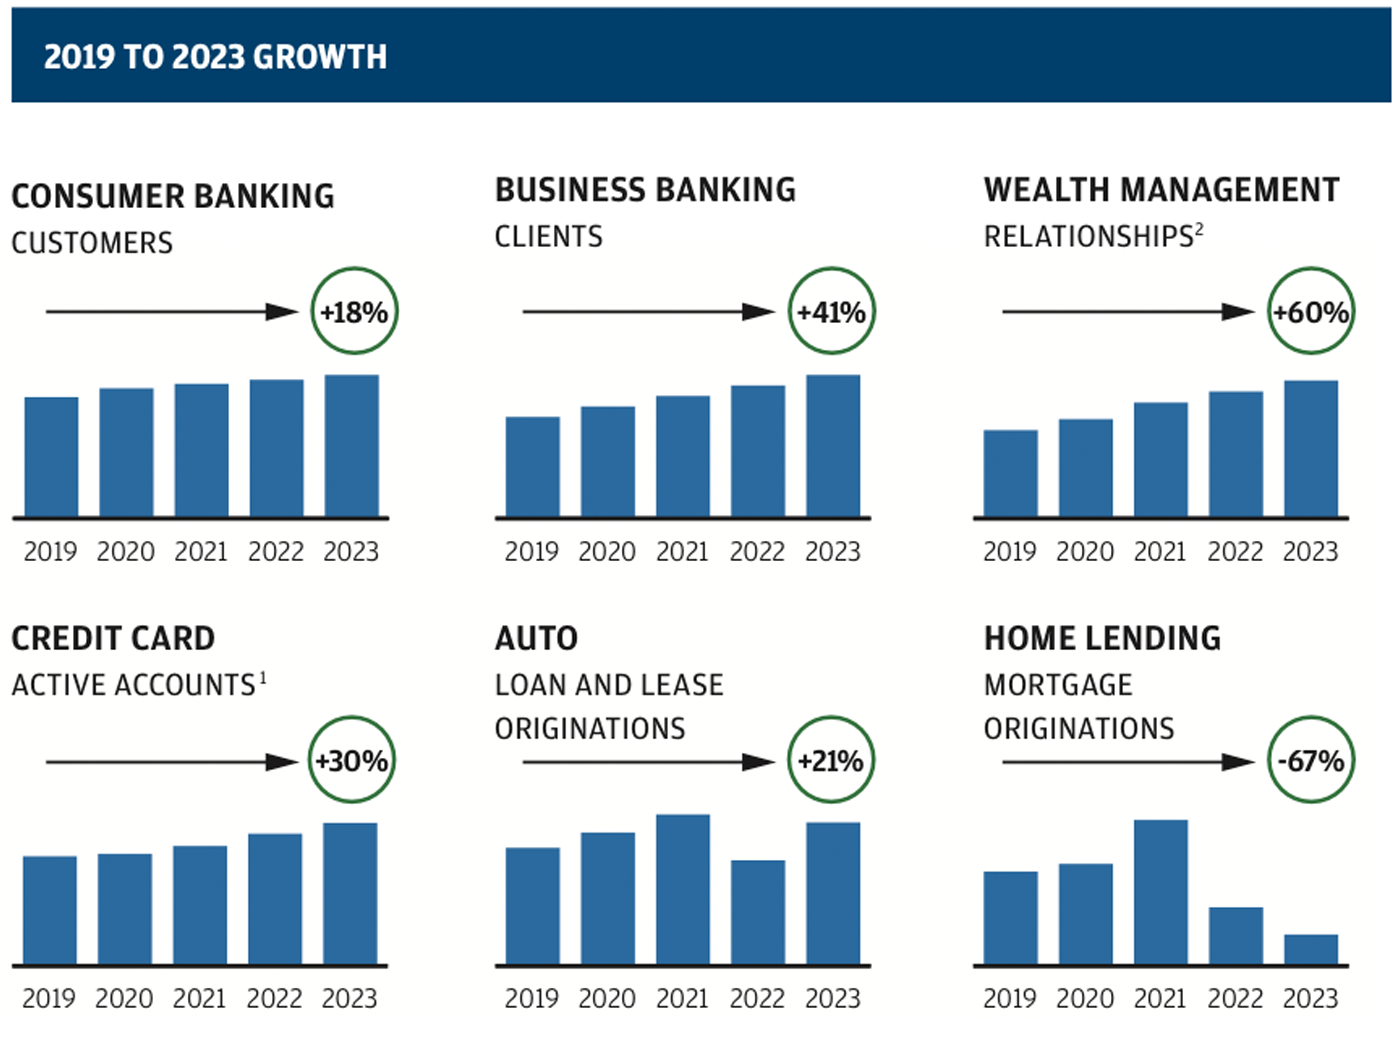 A graphic showing CCB growth from 2019 to 2023.